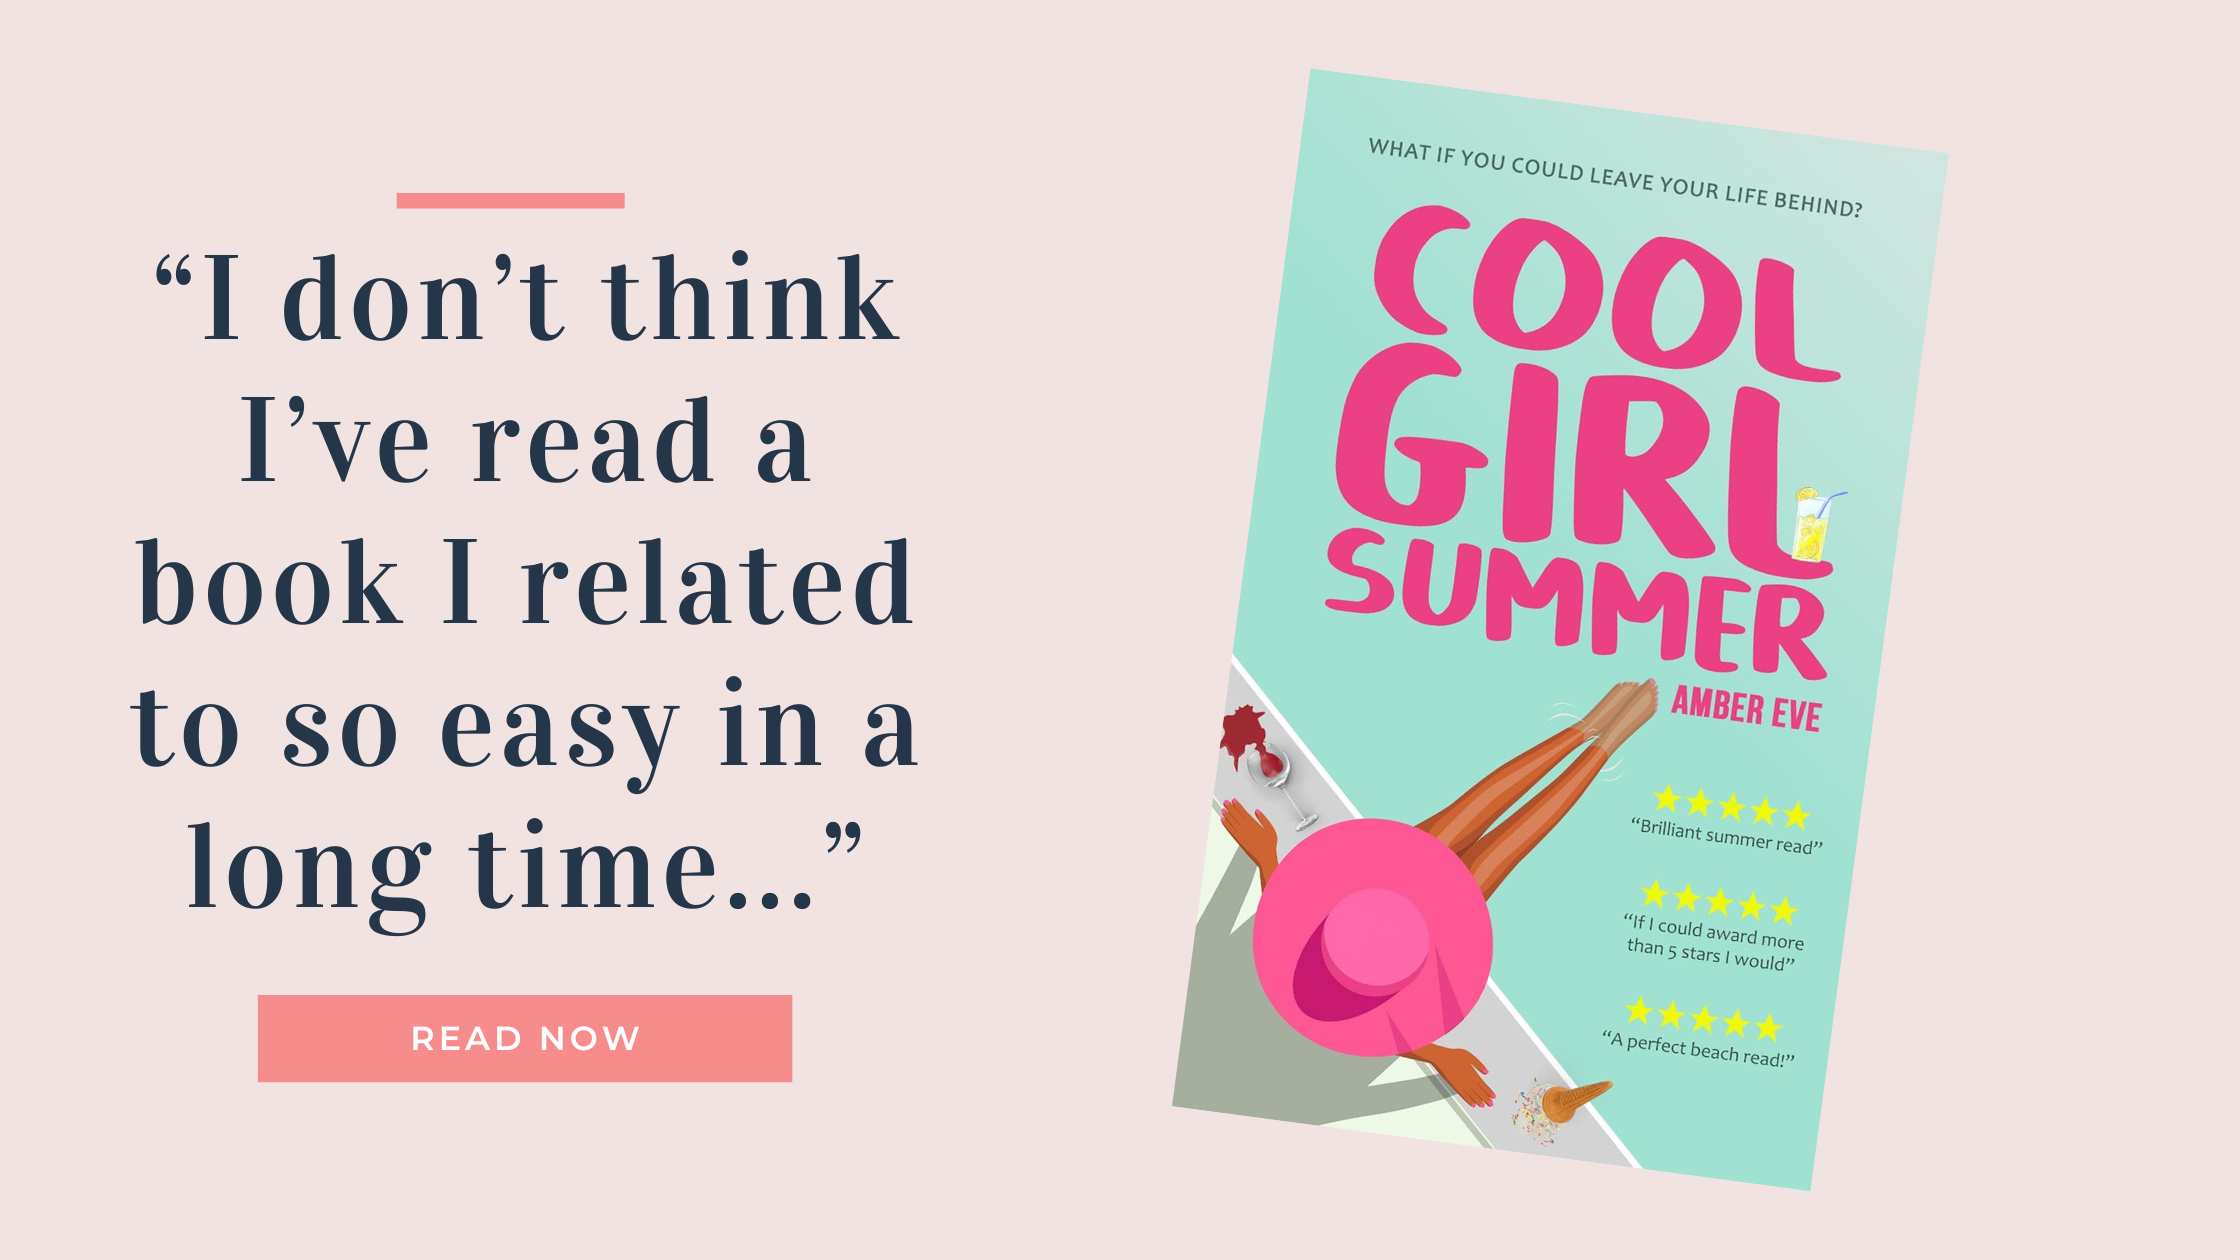 Praise for Cool Girl Summer by Amber Eve